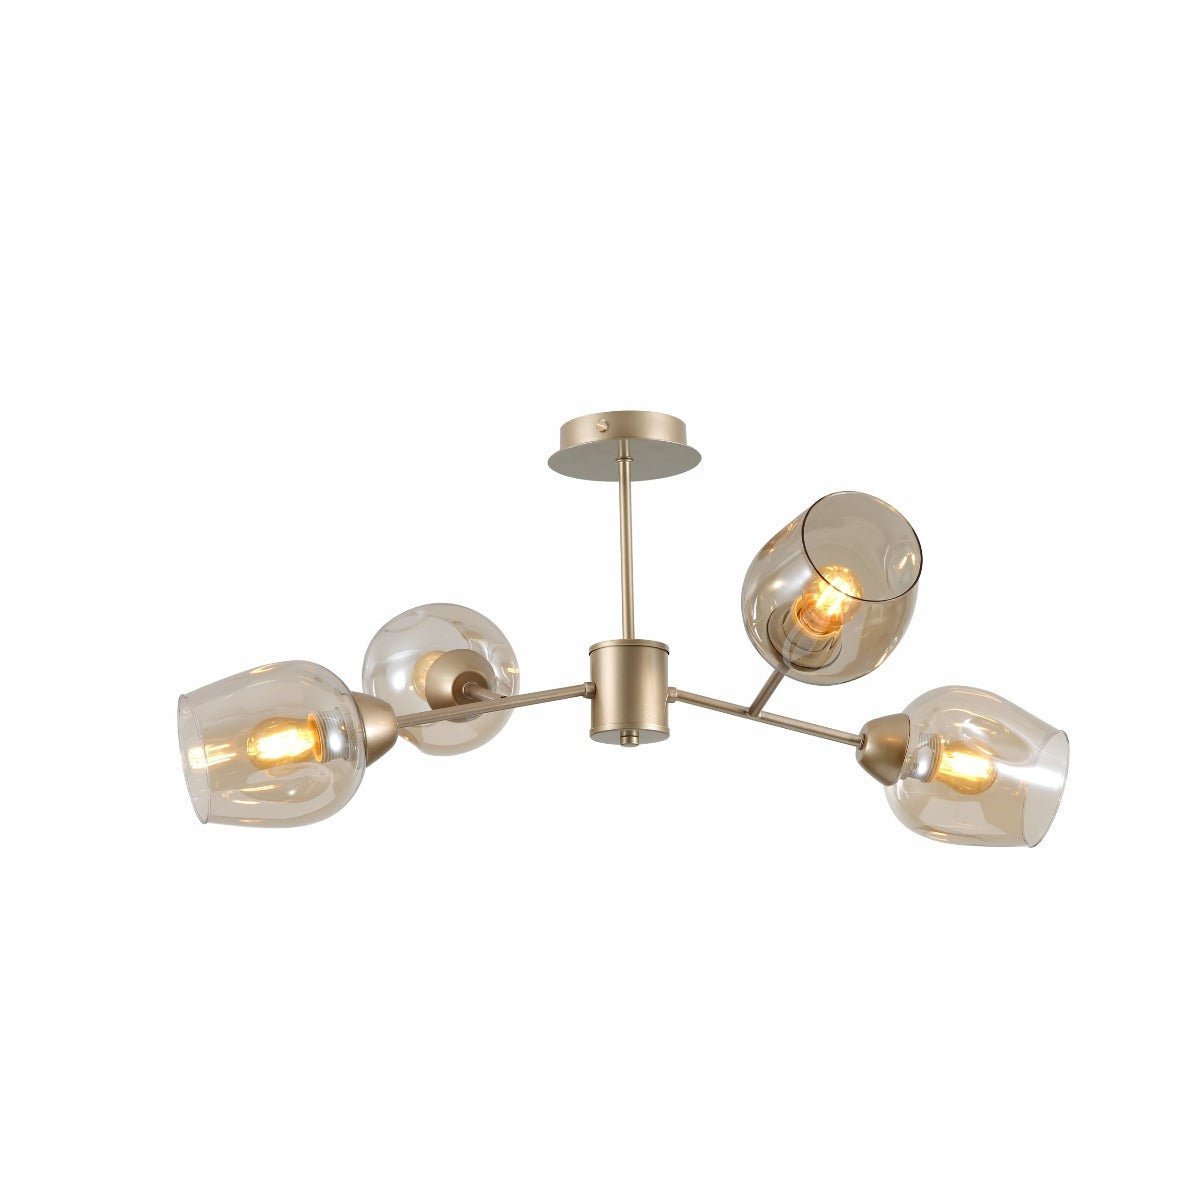 Main image of Amber Glass Metalic Gold Branch Twig Semi Flush Modern Ceiling Light with 4xE27 Fitting | TEKLED 159-17810